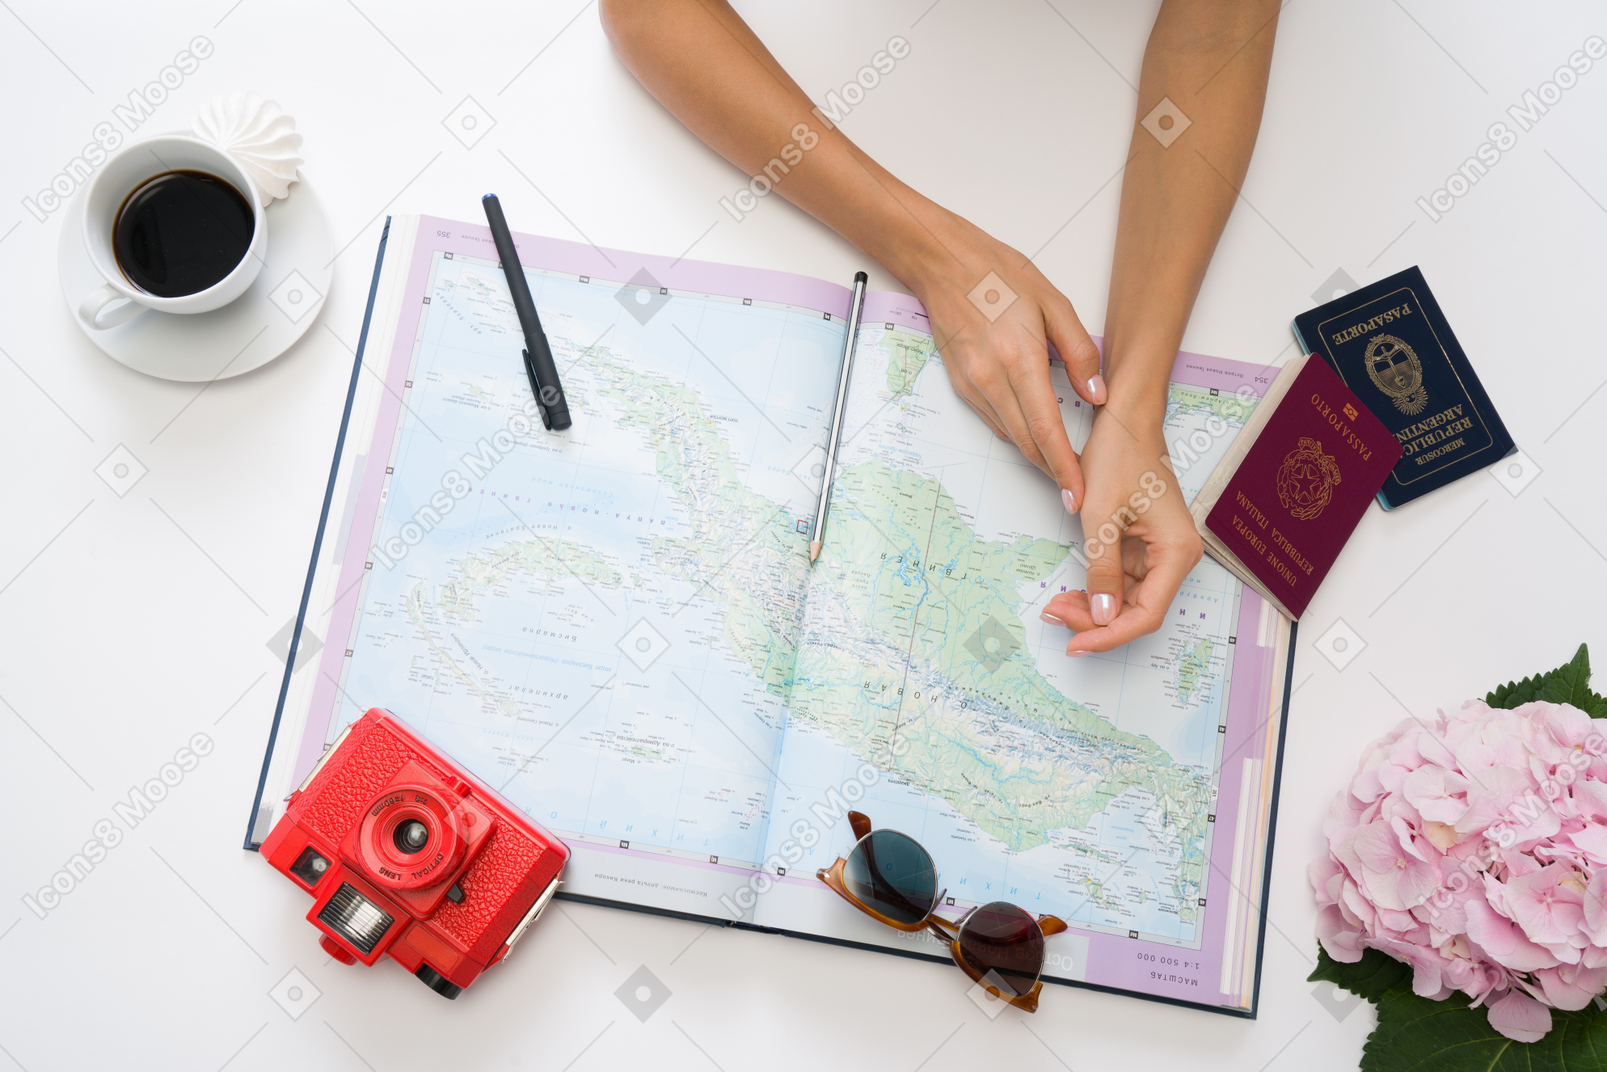 Female hands next to map, red camera, cup of coffee, passports and sunglasses